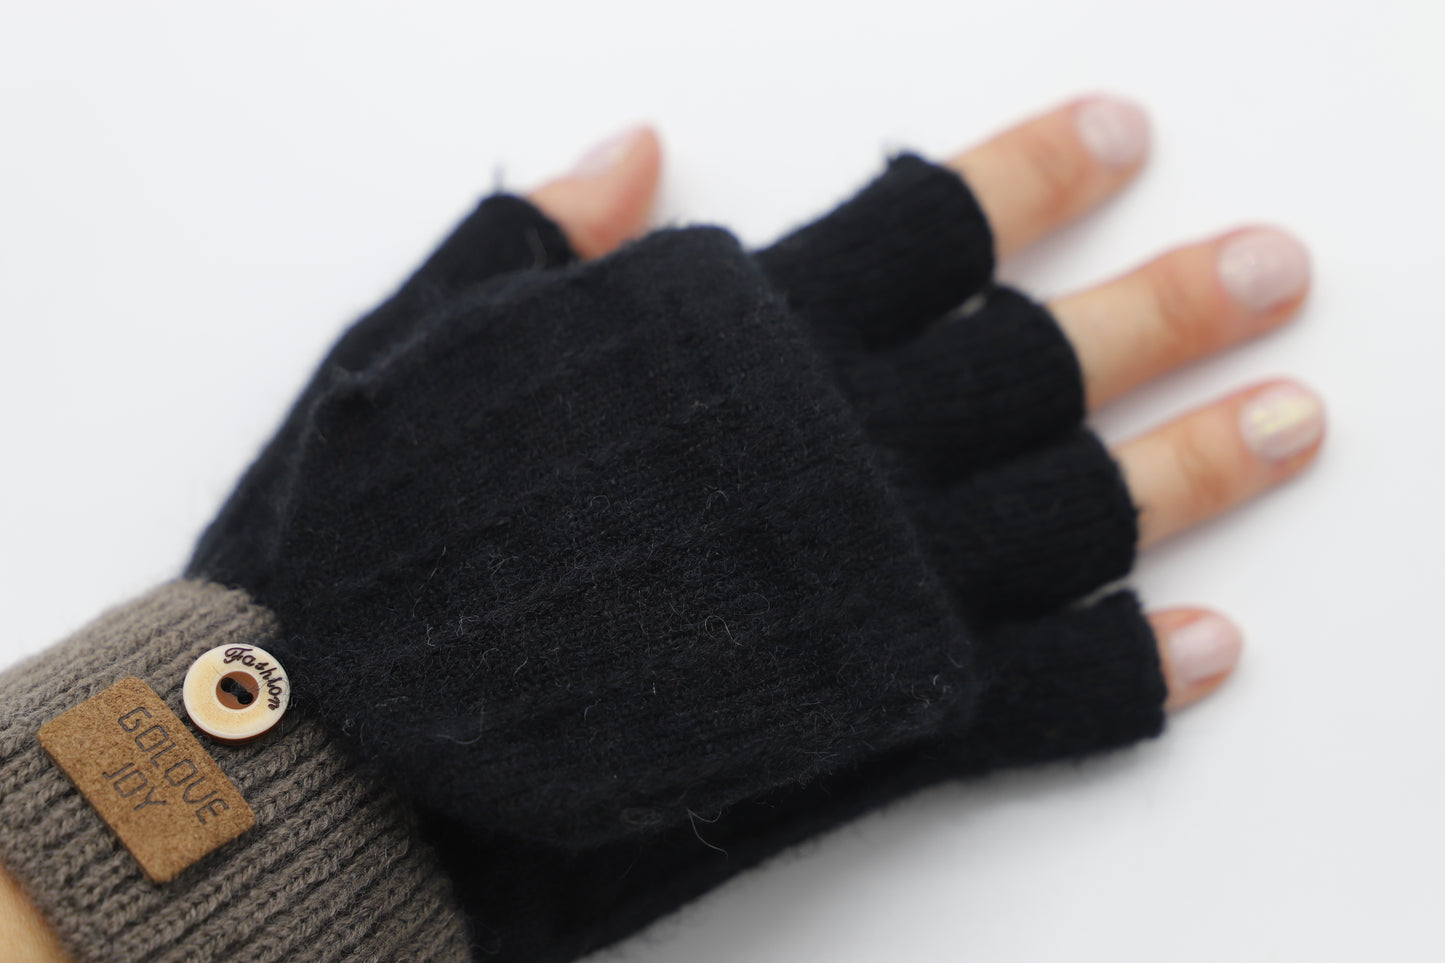 These flip-top gloves are finest gloves from Villanelle in black. A comfortable and useful accessory for women made from the softest wool blend for extreme comfort and warmth. The opening and closing cover gives you flexibility to grab things easily and the closing cover will keep you warm on cold, winter, autumn, spring days. This product is sourced and manufactured in Poland.